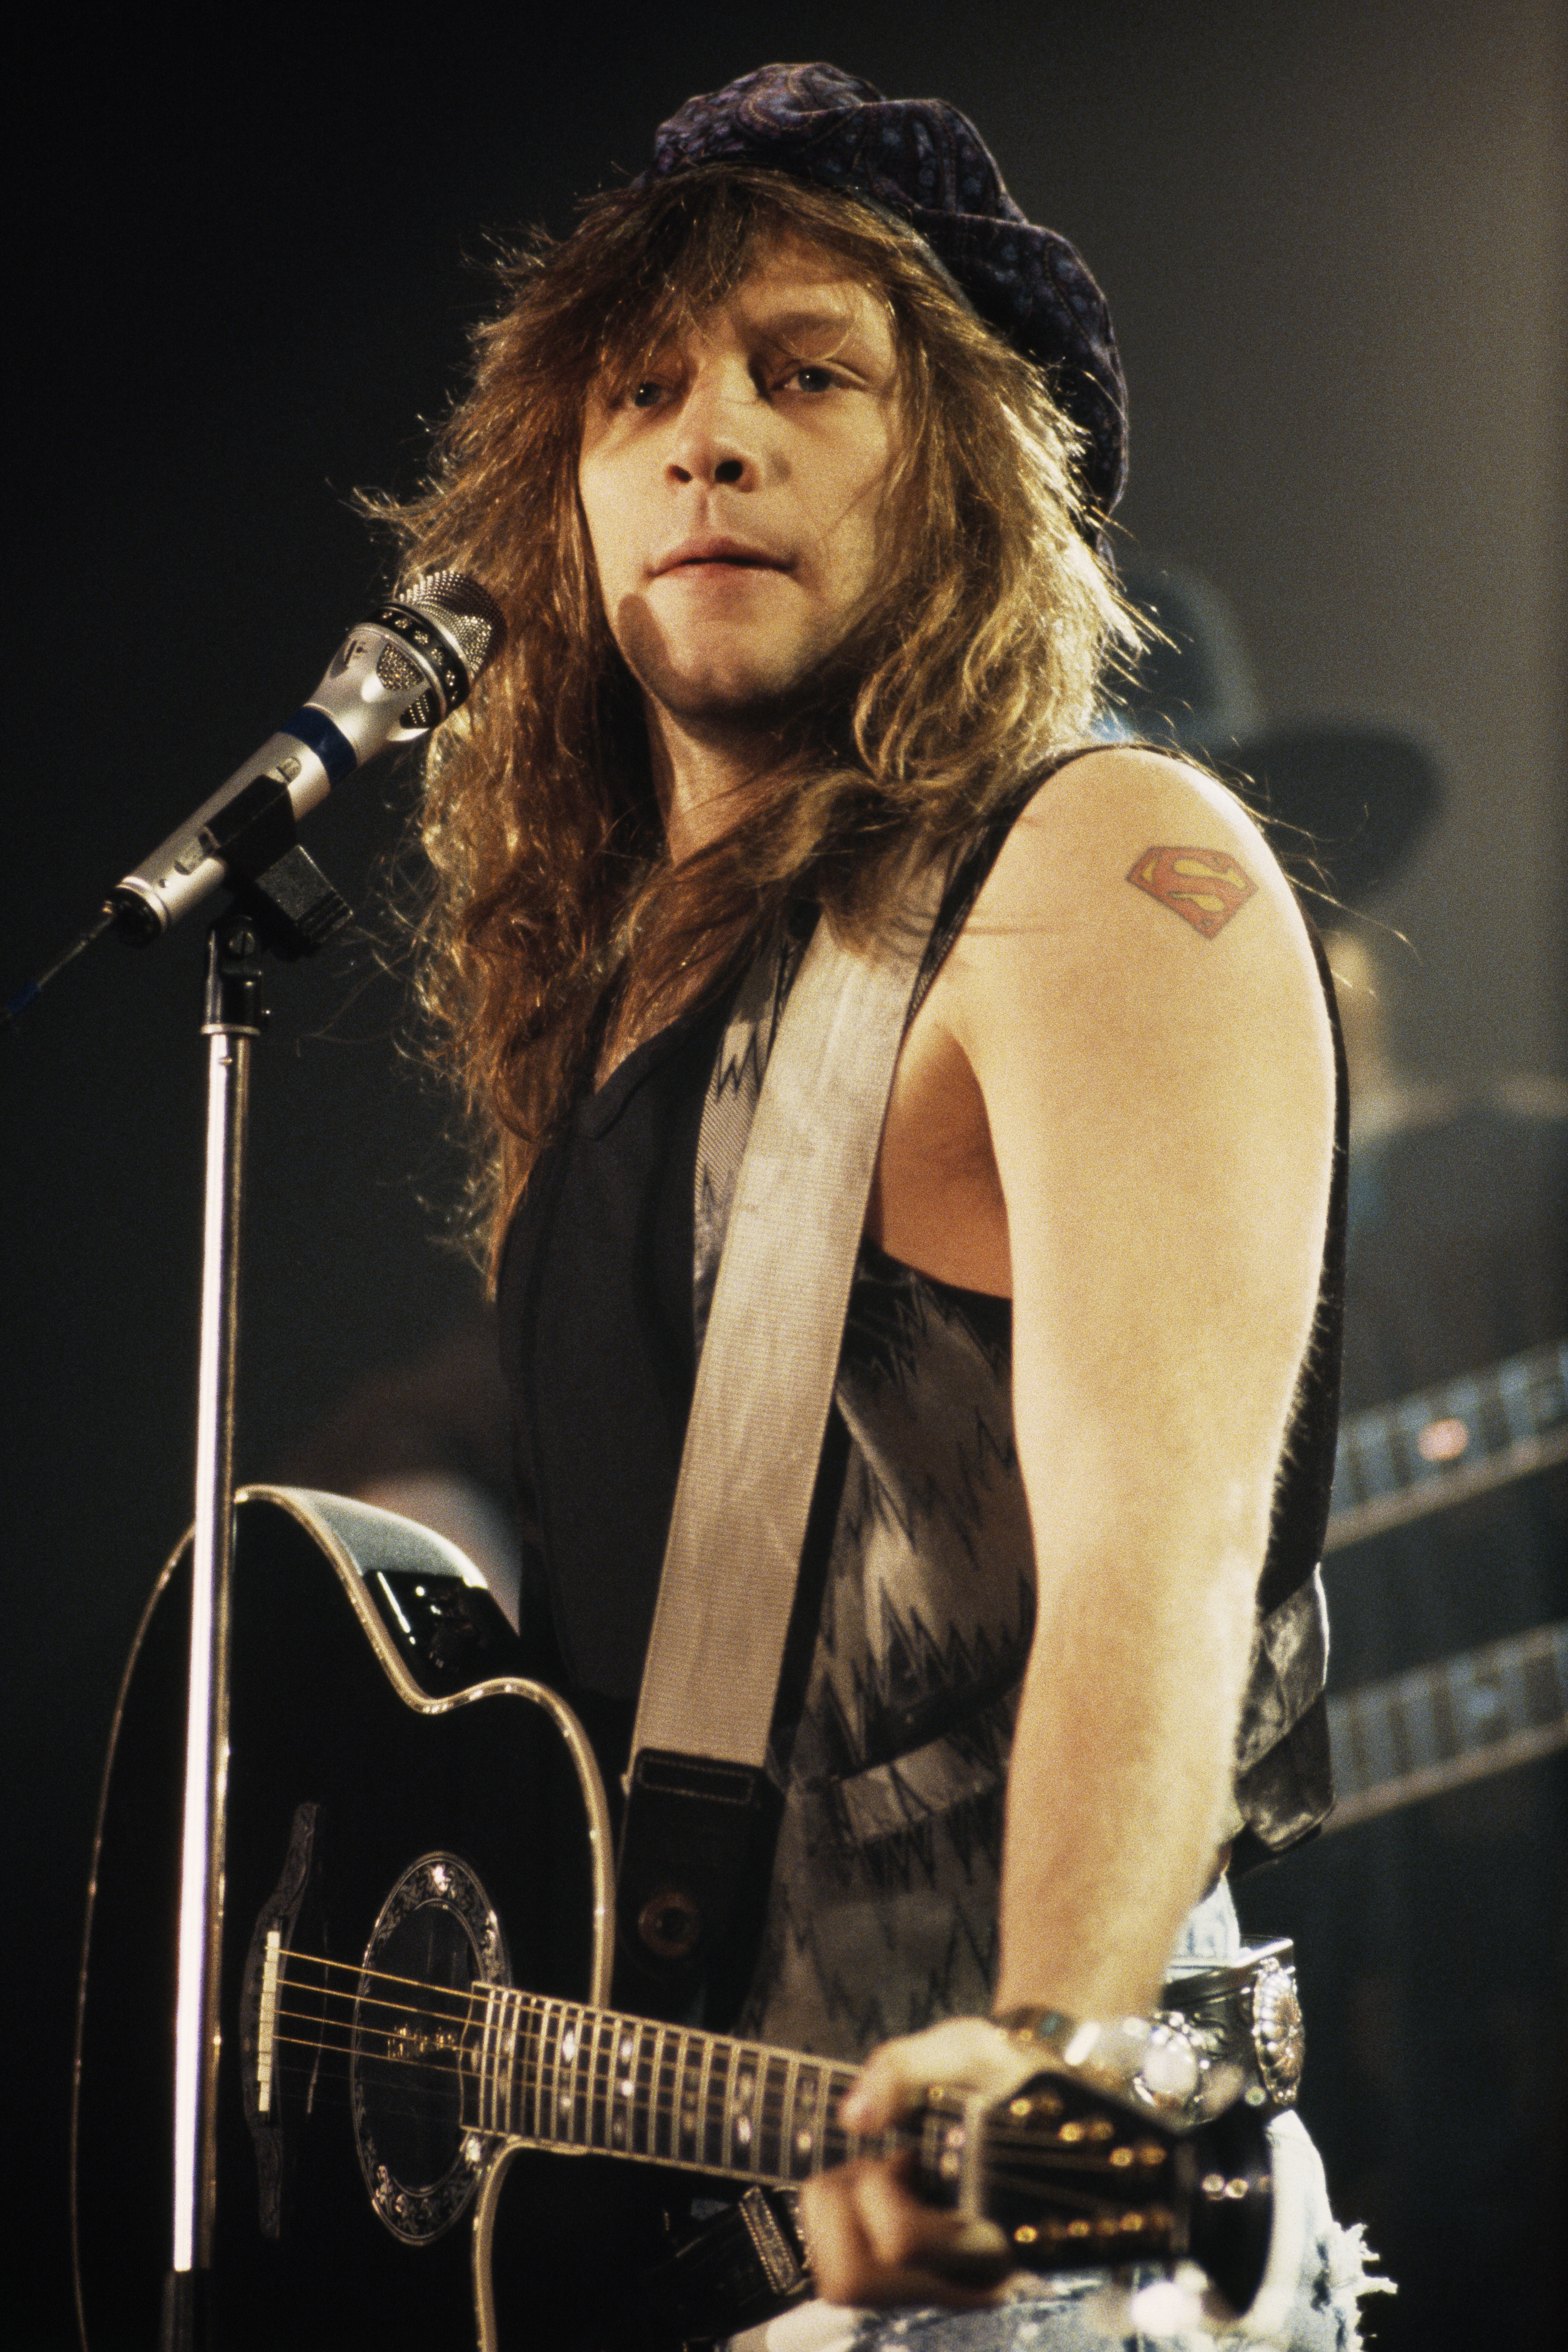 Jon Bon Jovi on stage at the San Remo Festival in an undated photo | Source: Getty Images